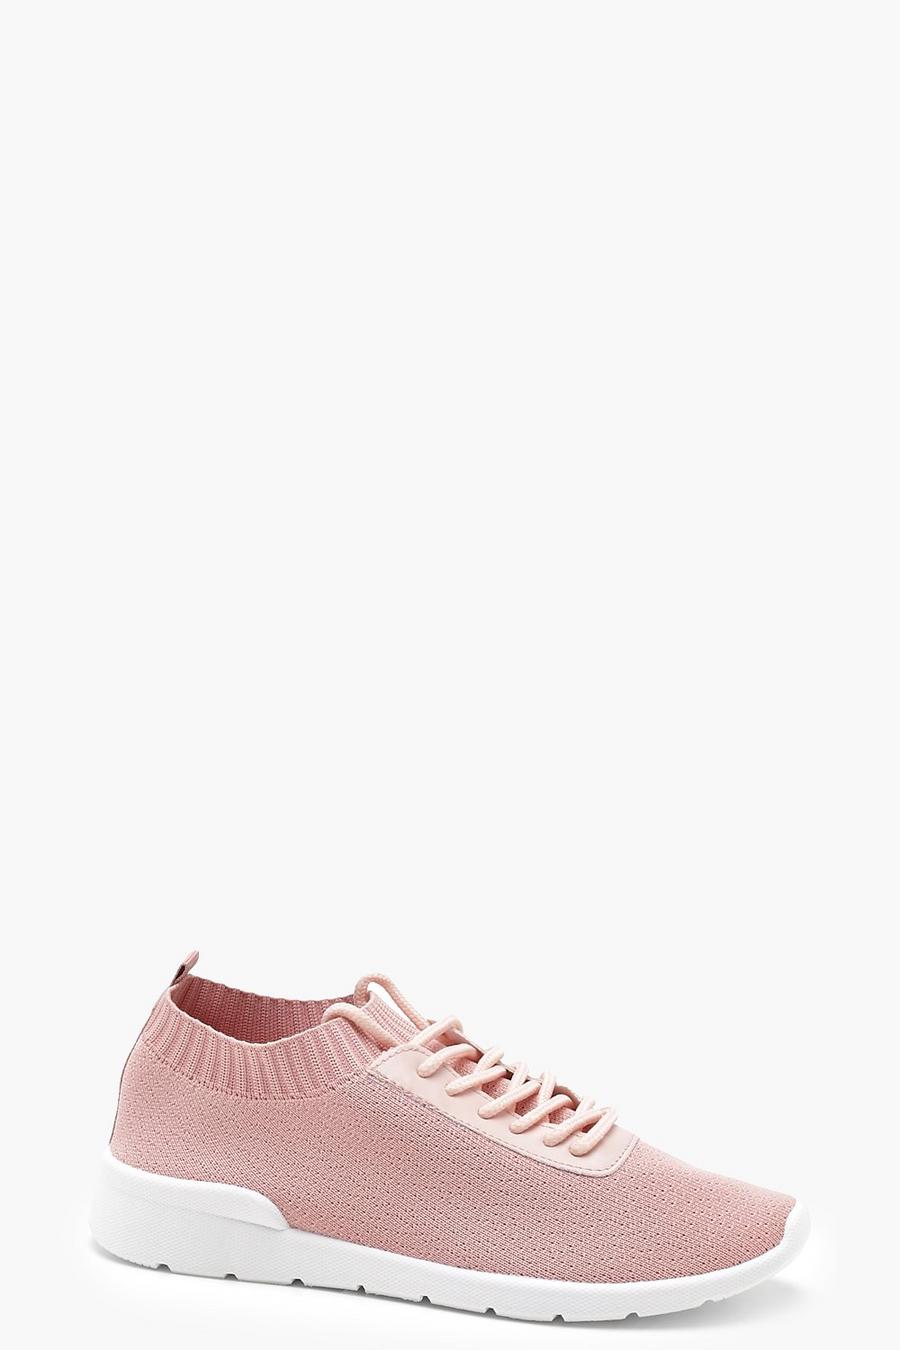 Blush Knitted Sneakers image number 1